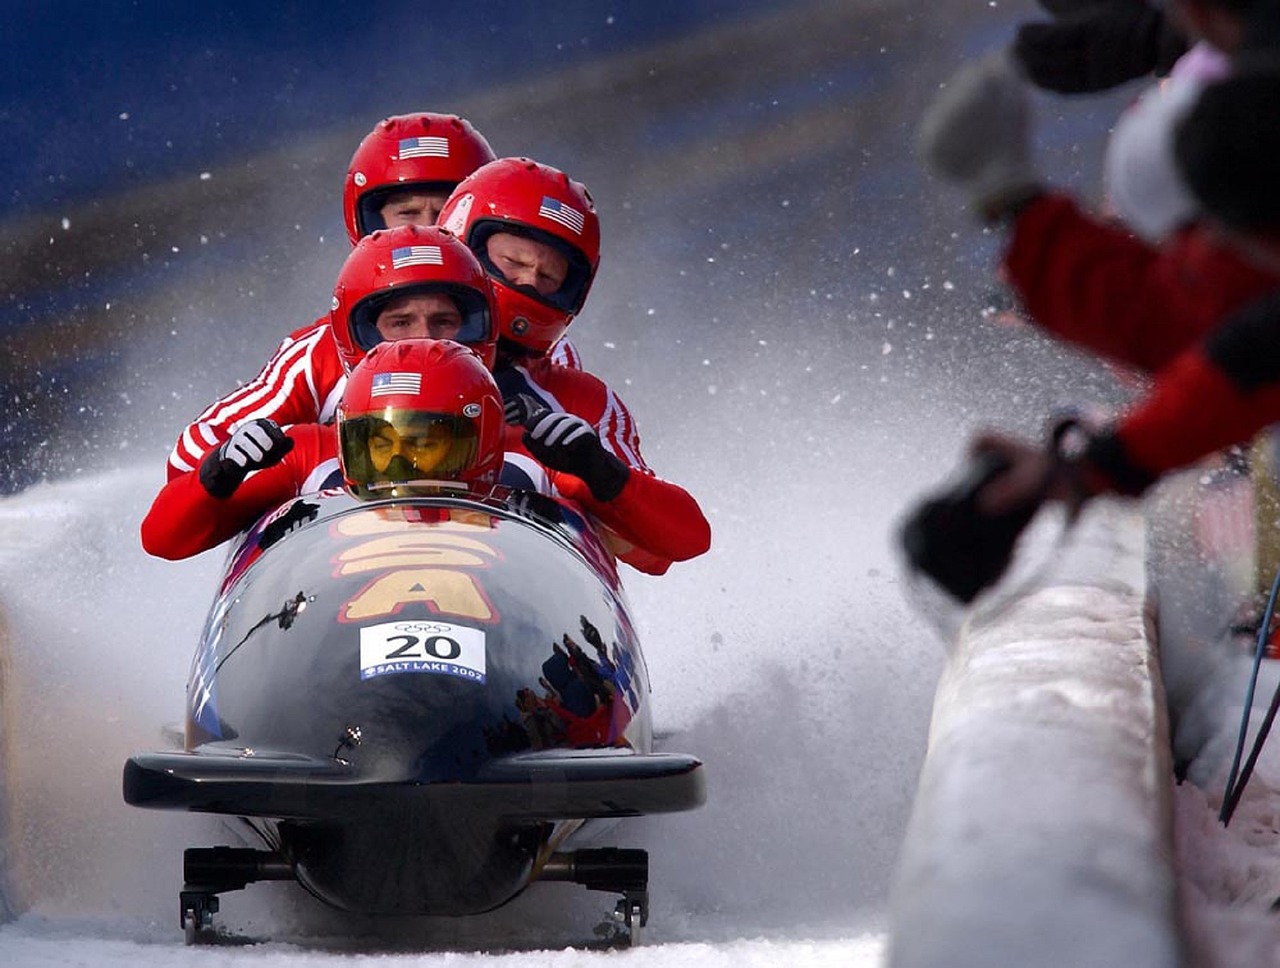 Sports olympiques : le bobsleigh